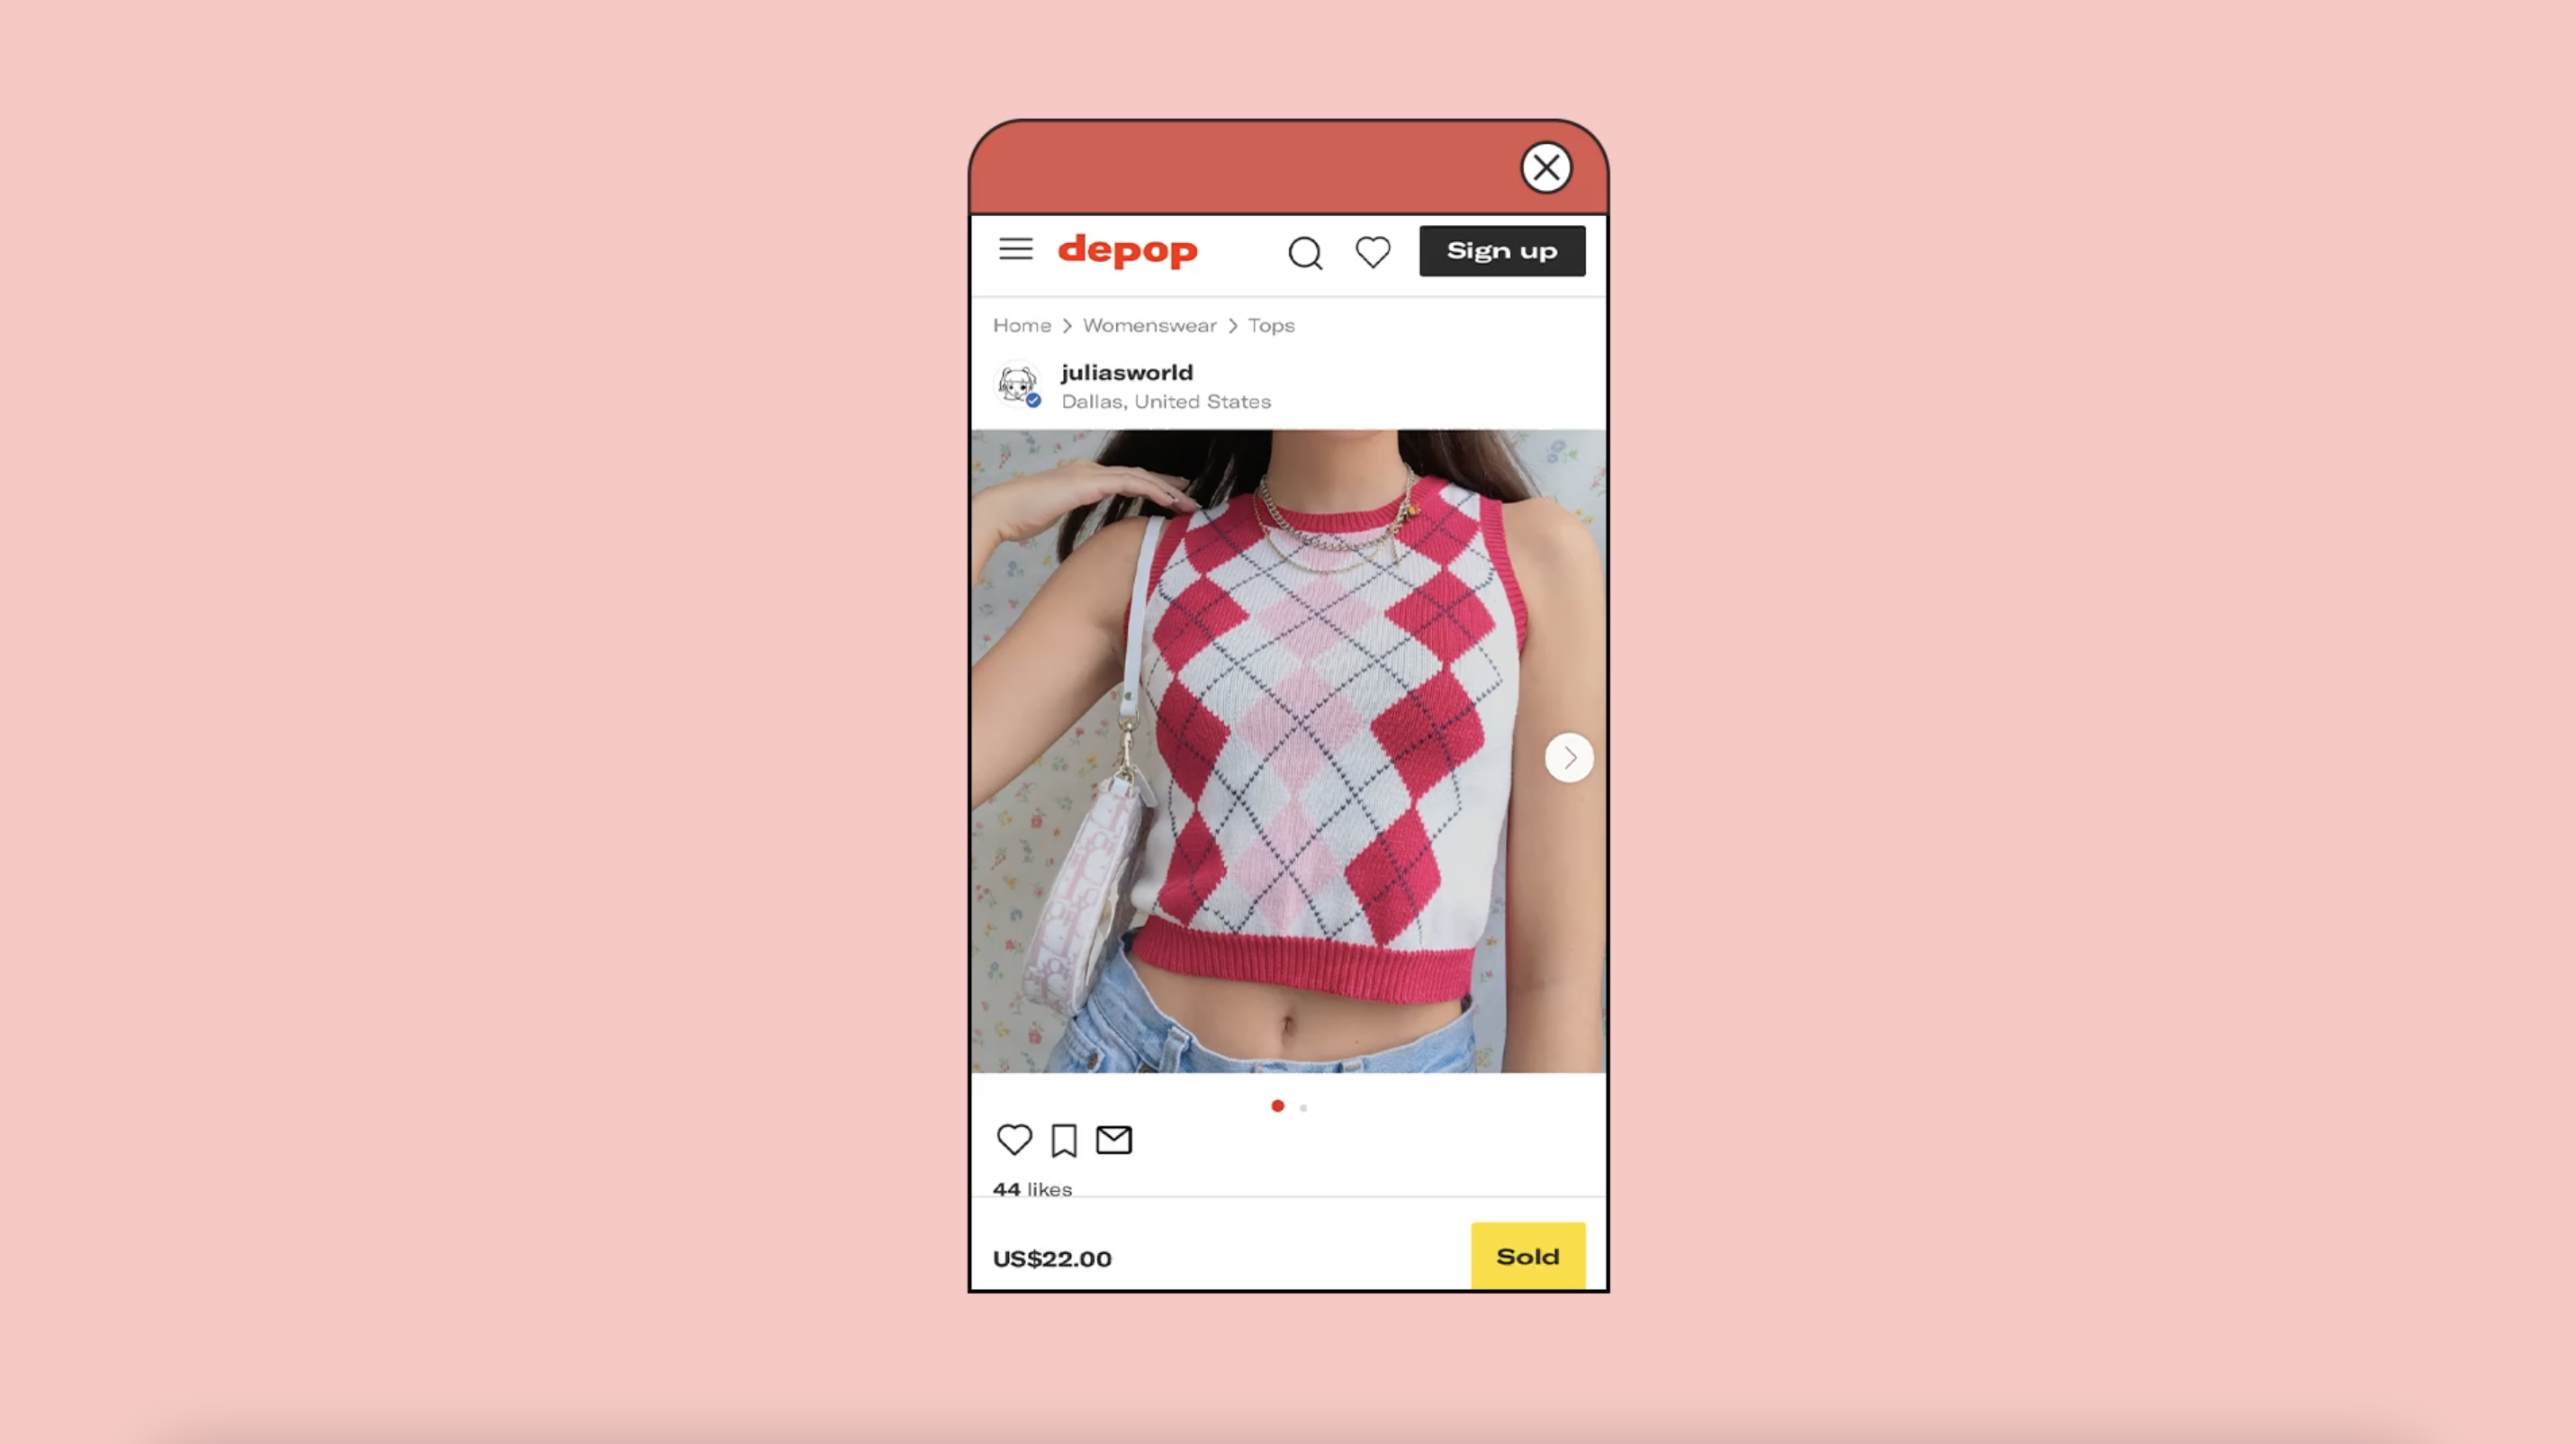 Not just SHEIN: More brands are using influencers to fix their